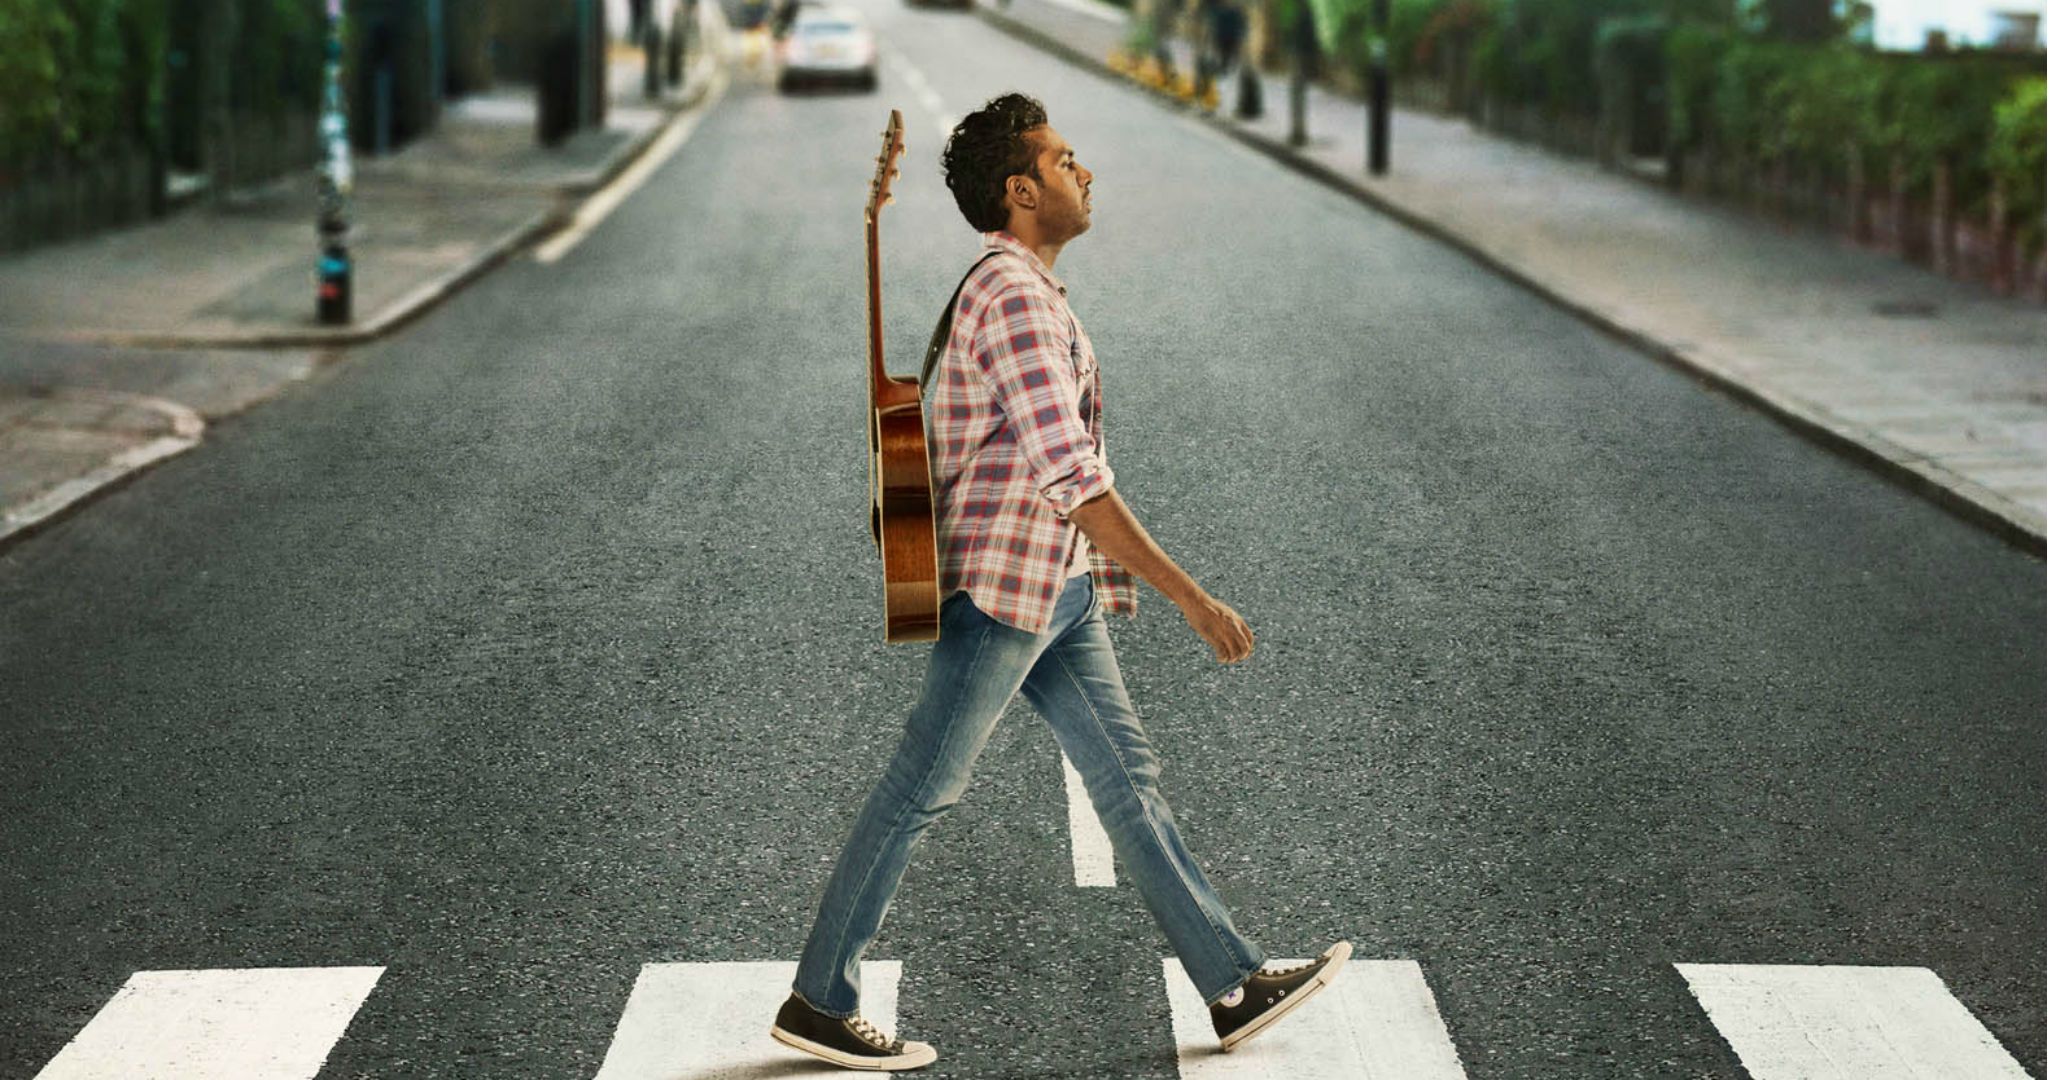 The character of Jack recreates the famous "Abby Road" record cover all by himself in the poster for this musical.